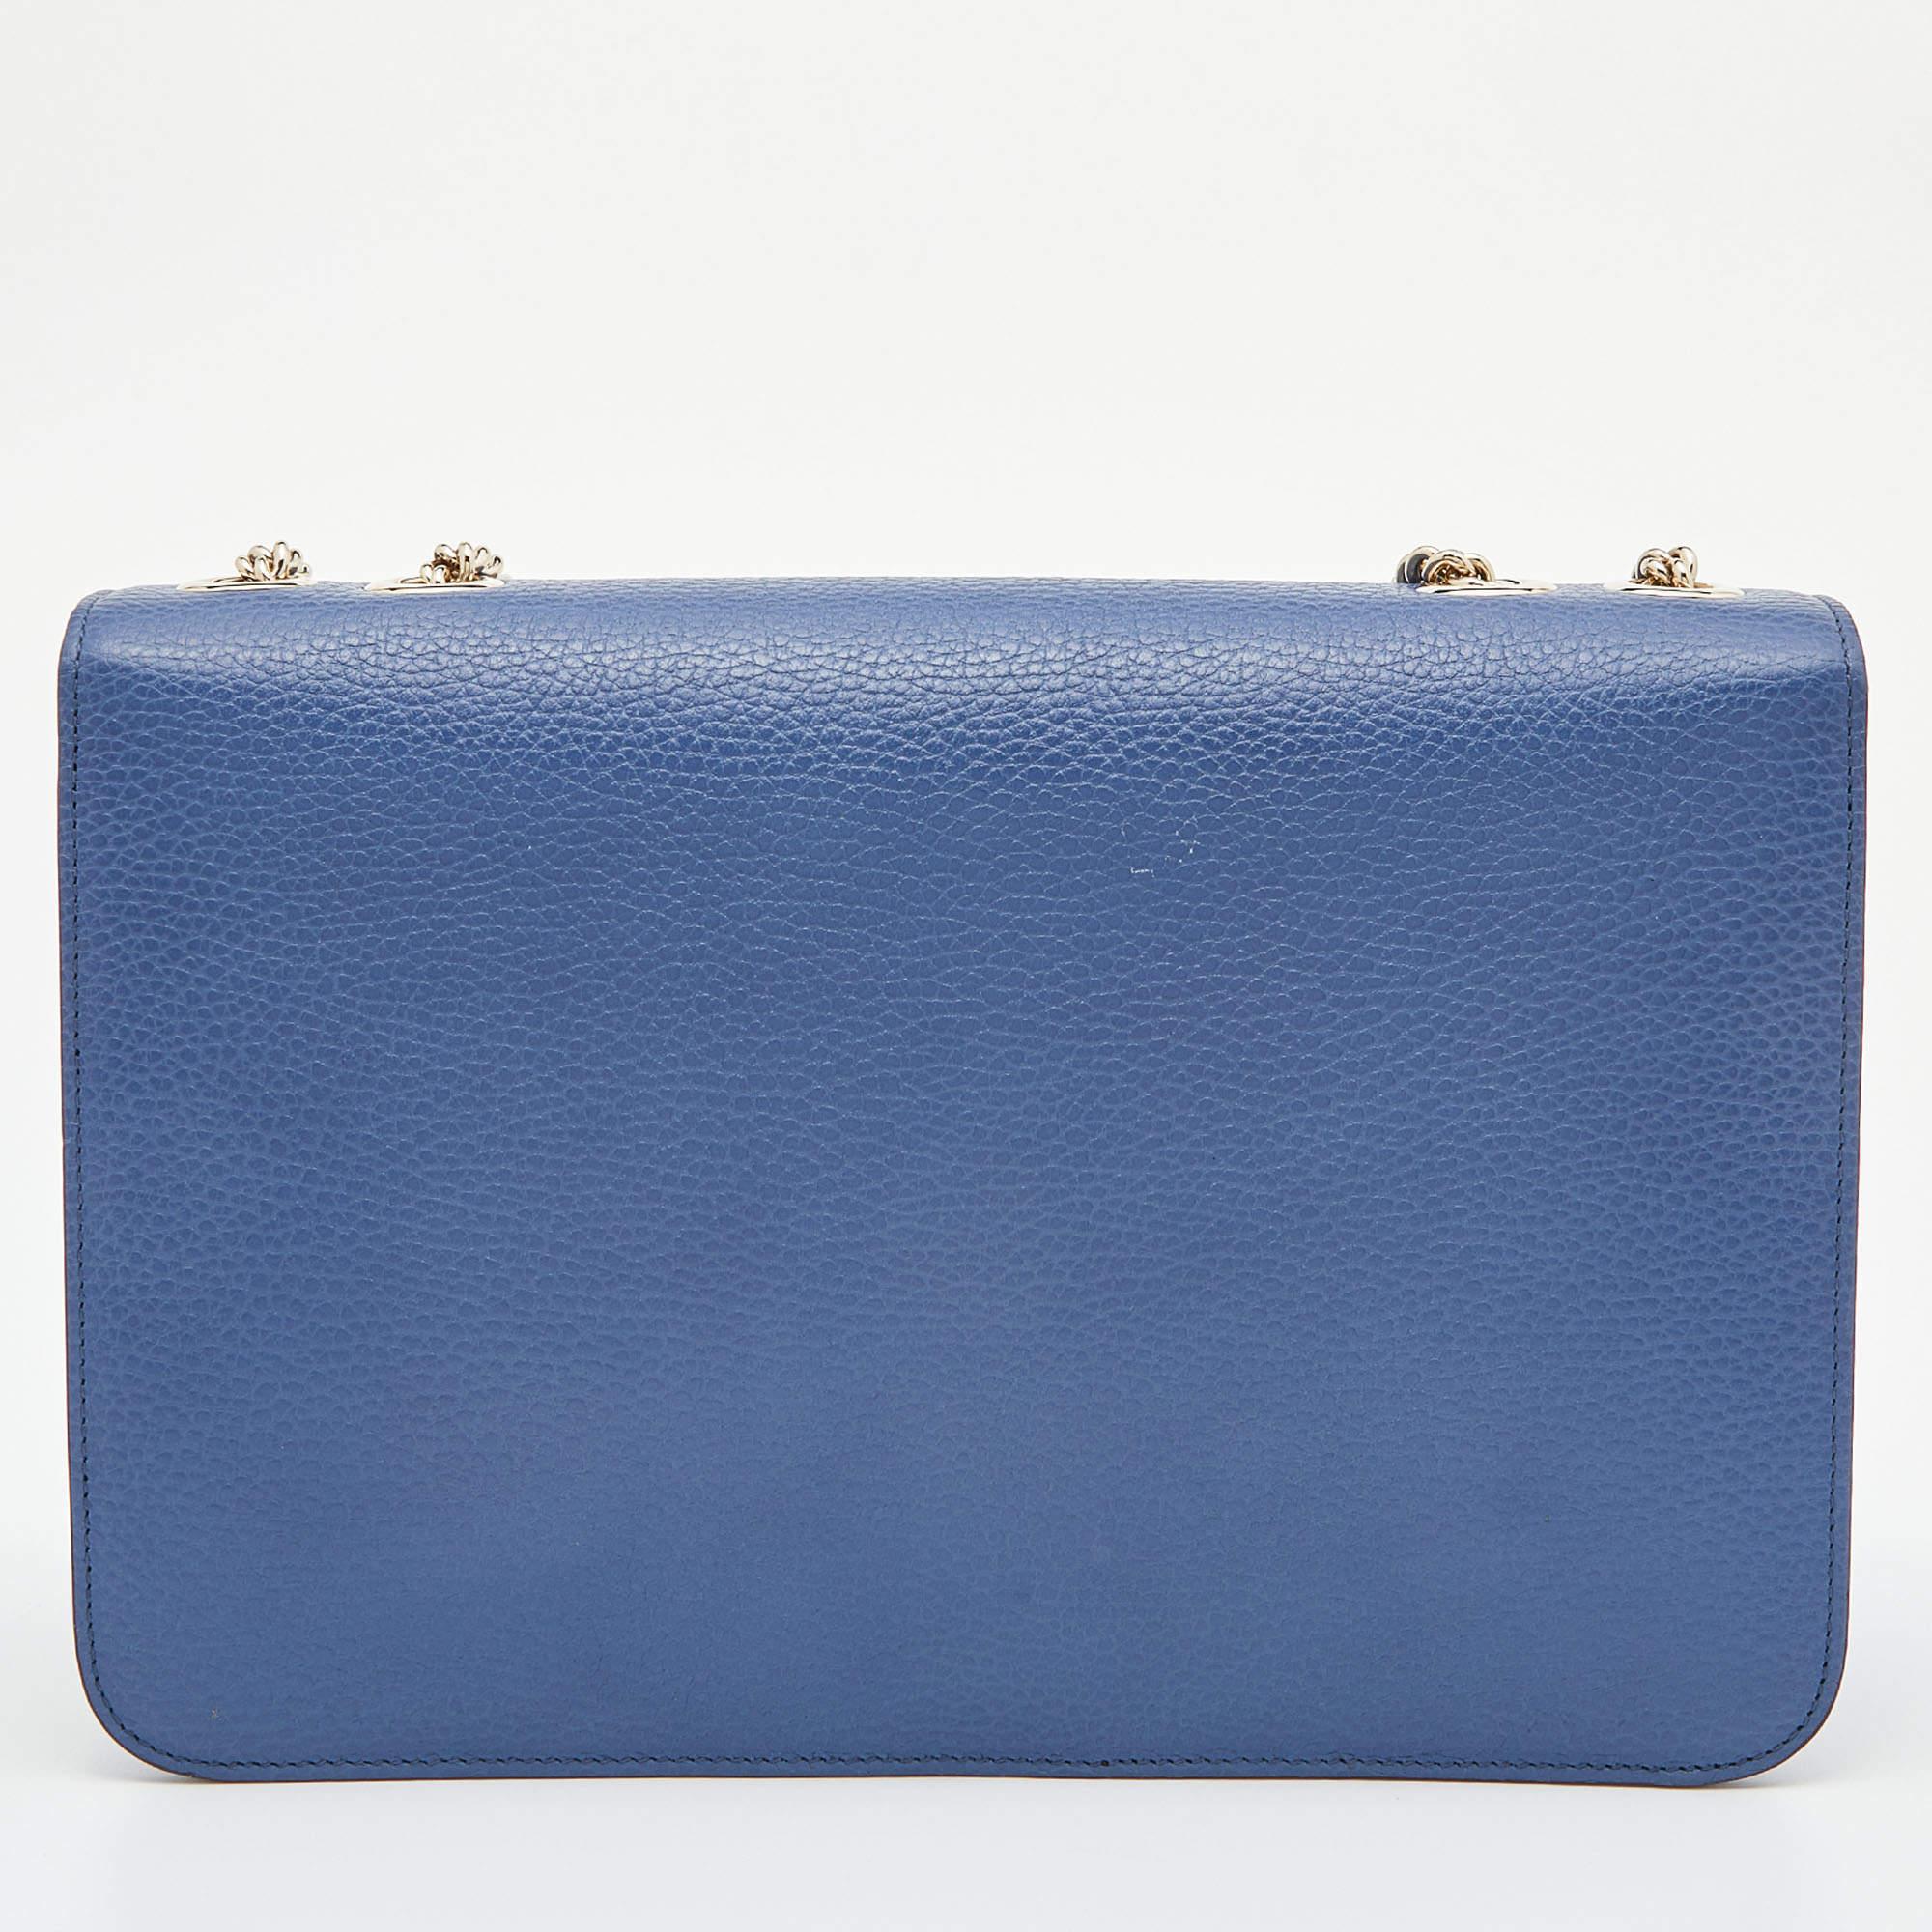 With this exquisite shoulder bag, Gucci introduces a stunning creation. Crafted from leather in a blue hue, it is styled with a flap that has the interlocking G in a gold tone. The elegant bag has a spacious interior and a slender chain strap for an